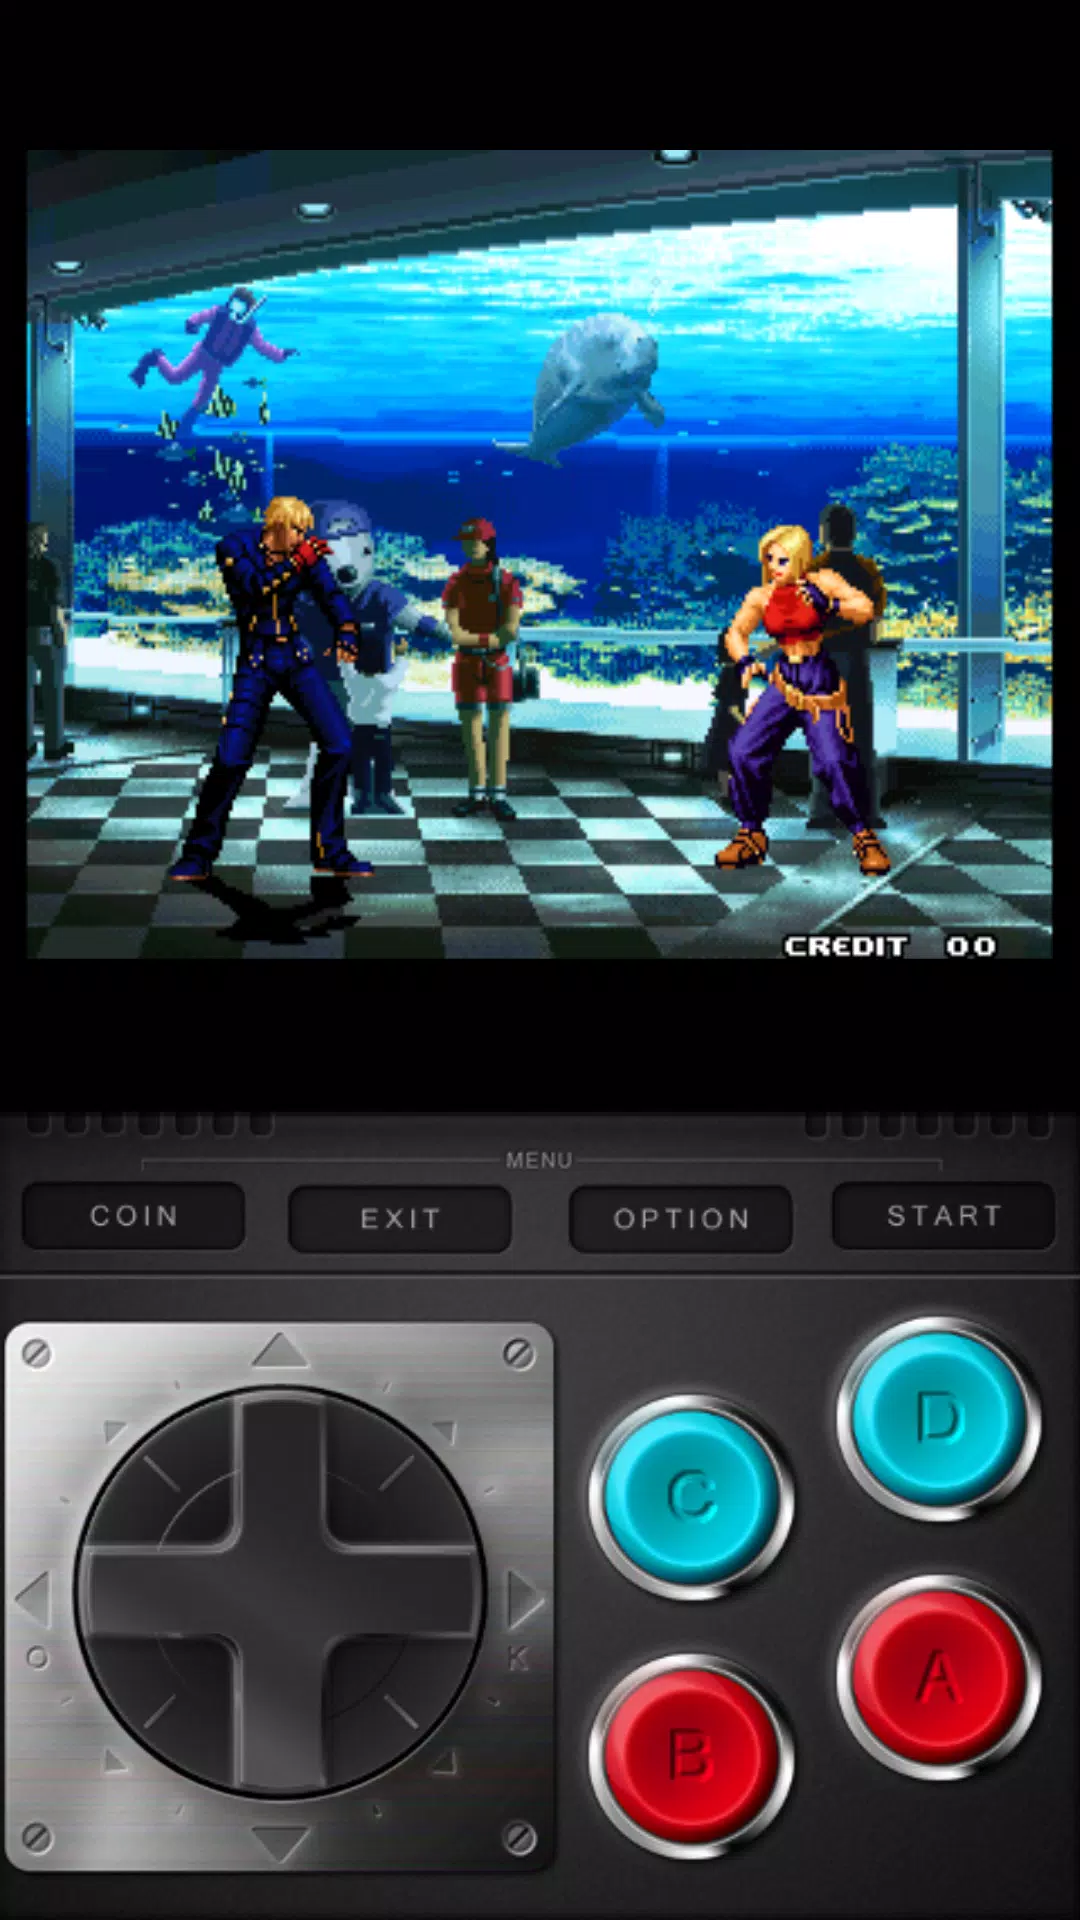 KOF 2002 APK 1.1.2 - Download Free for Android